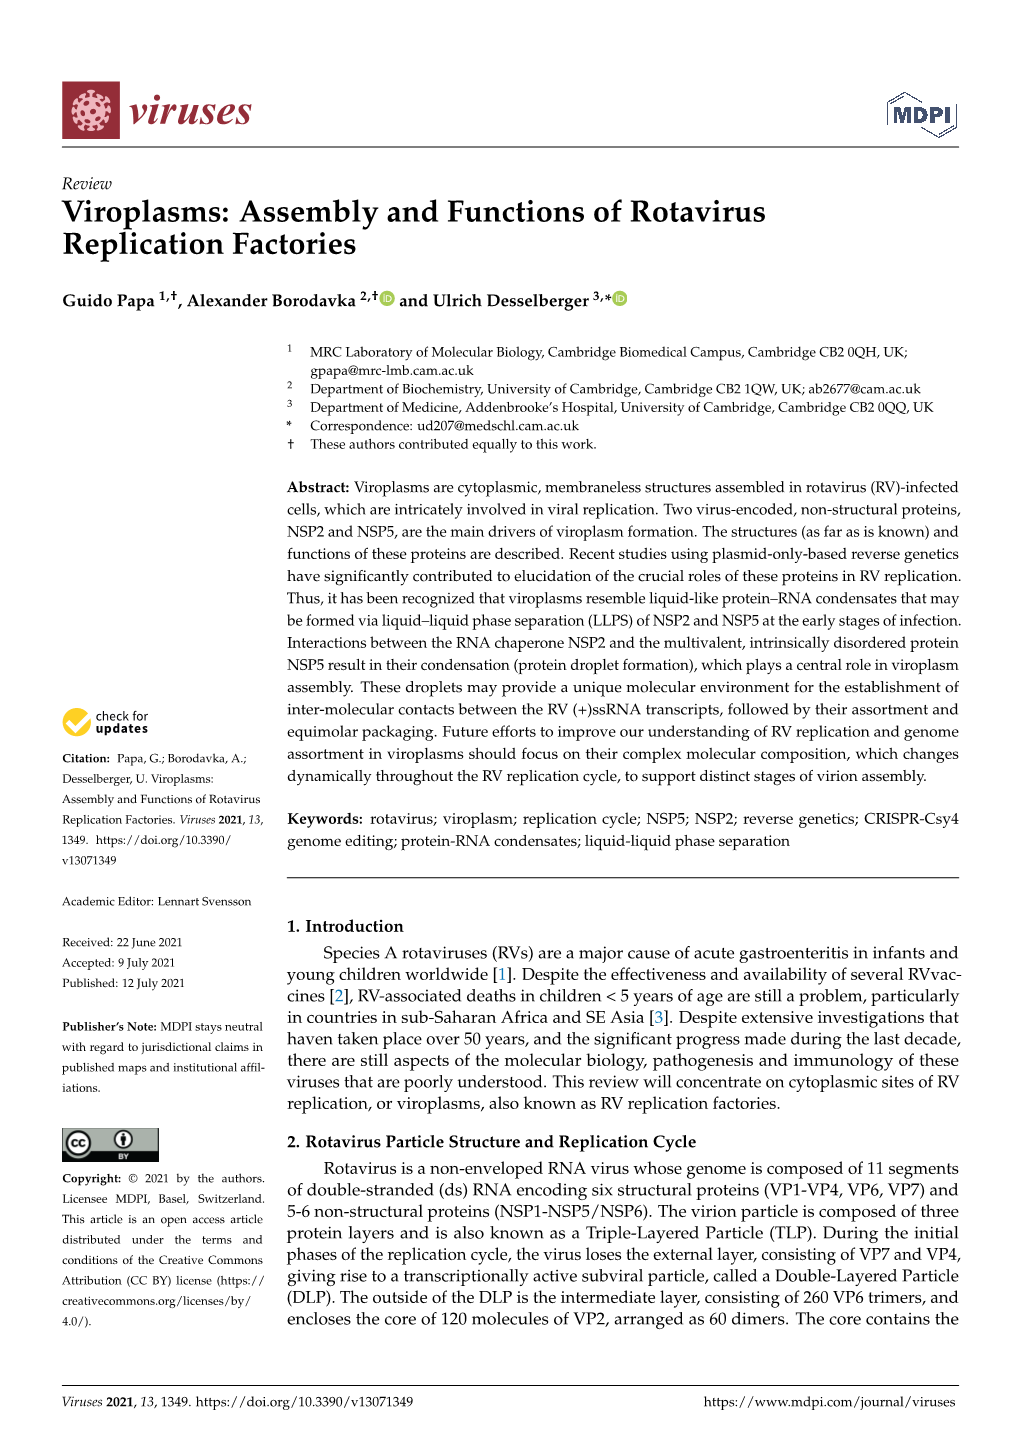 Viroplasms: Assembly and Functions of Rotavirus Replication Factories